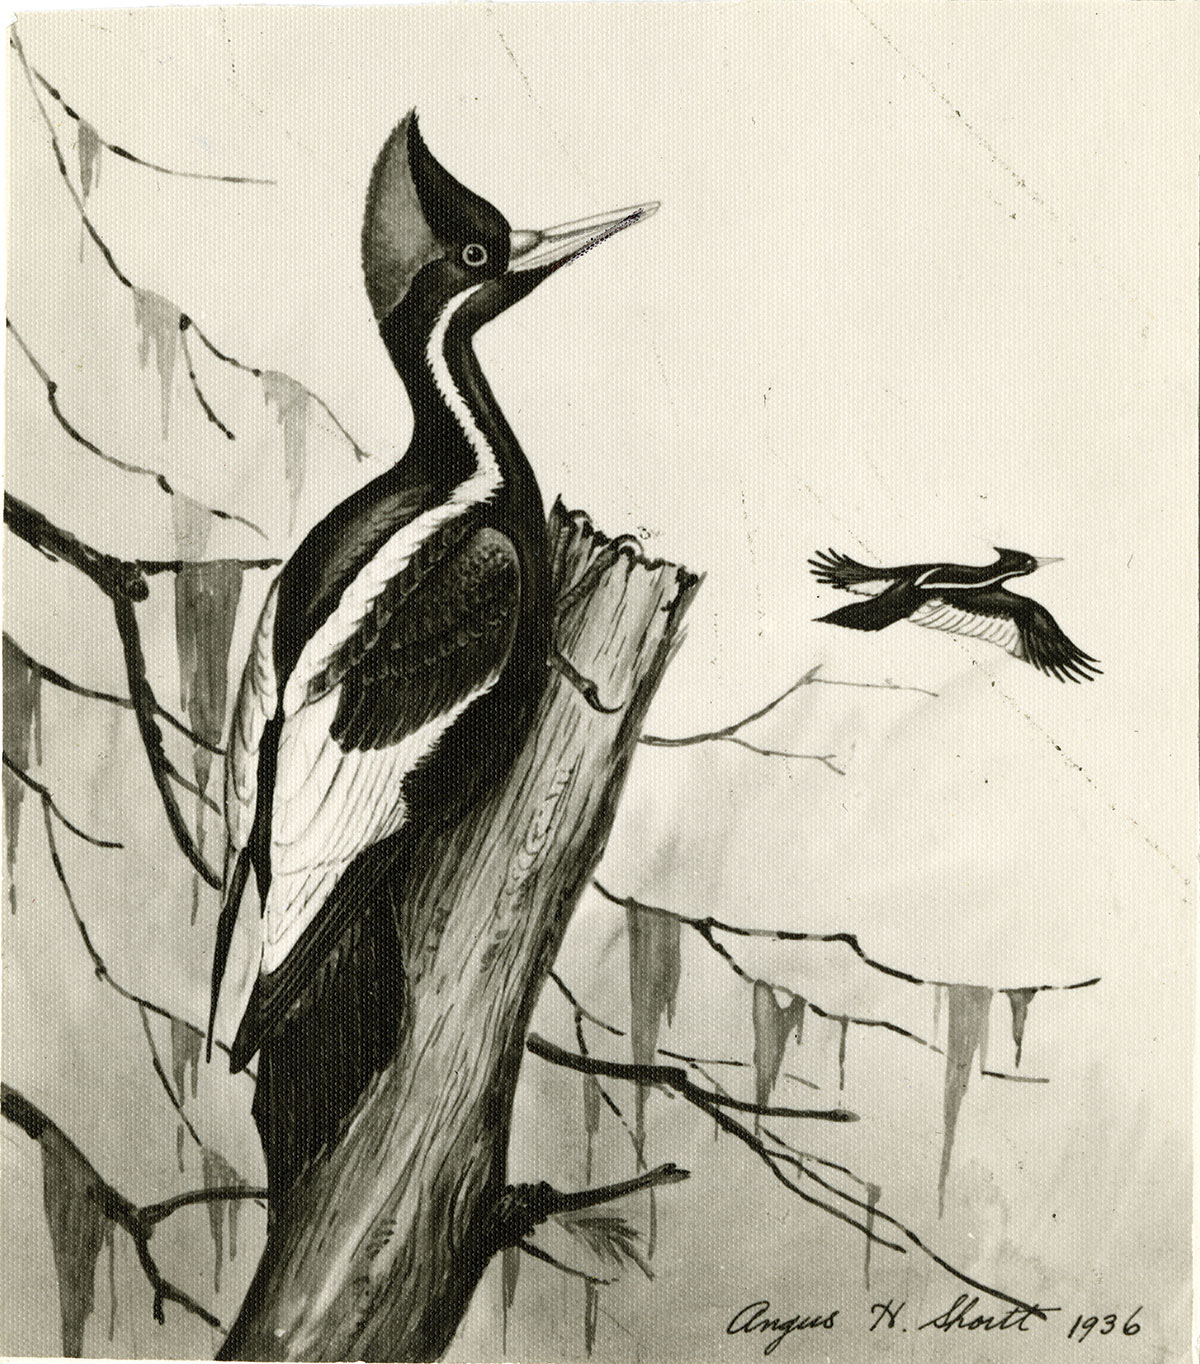 An illustration of a woodpecker.